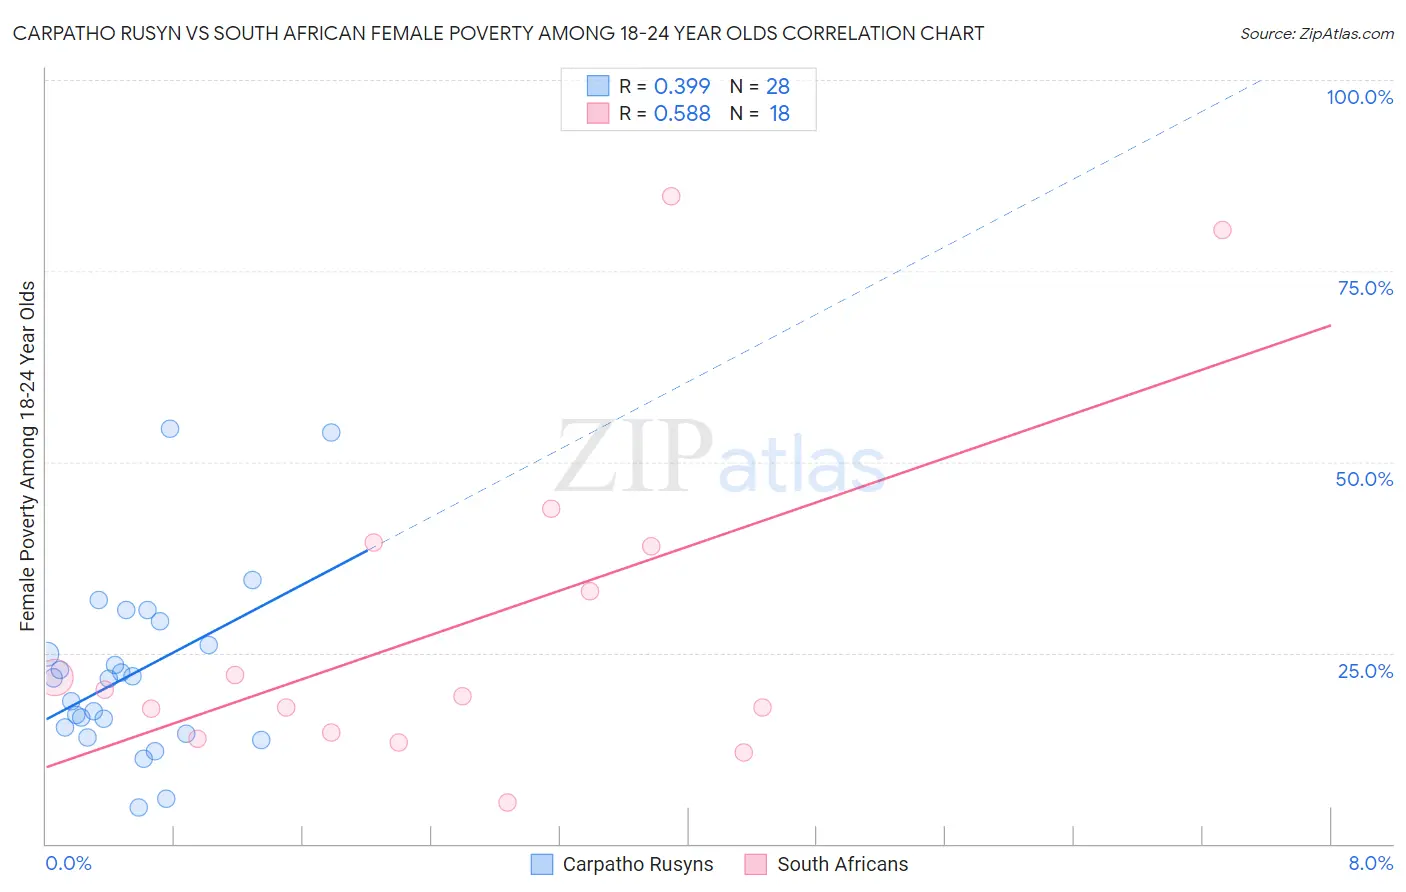 Carpatho Rusyn vs South African Female Poverty Among 18-24 Year Olds